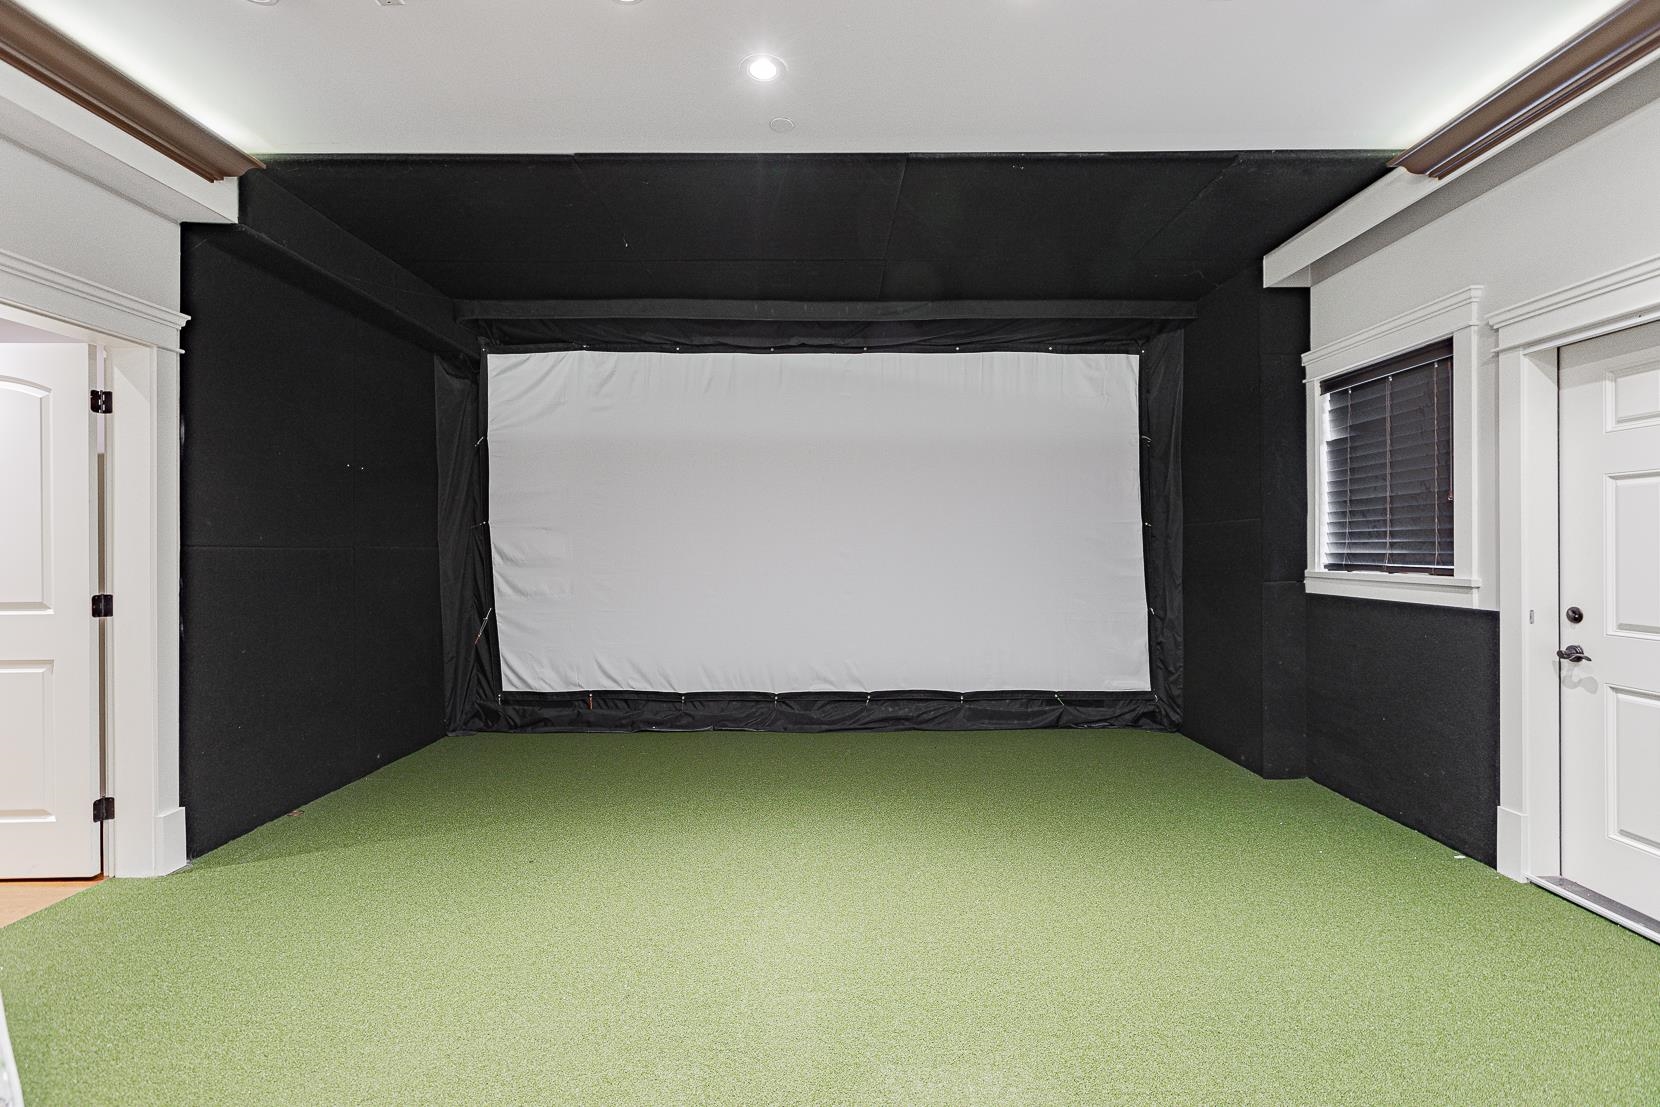 Multifunctional Entertain Room: Fully Built-In Speaker System, with Bluetooth Connectivity. Noise-Shock Absorbent Materials on Wall. Practice your golf swings with REAL Golf balls!